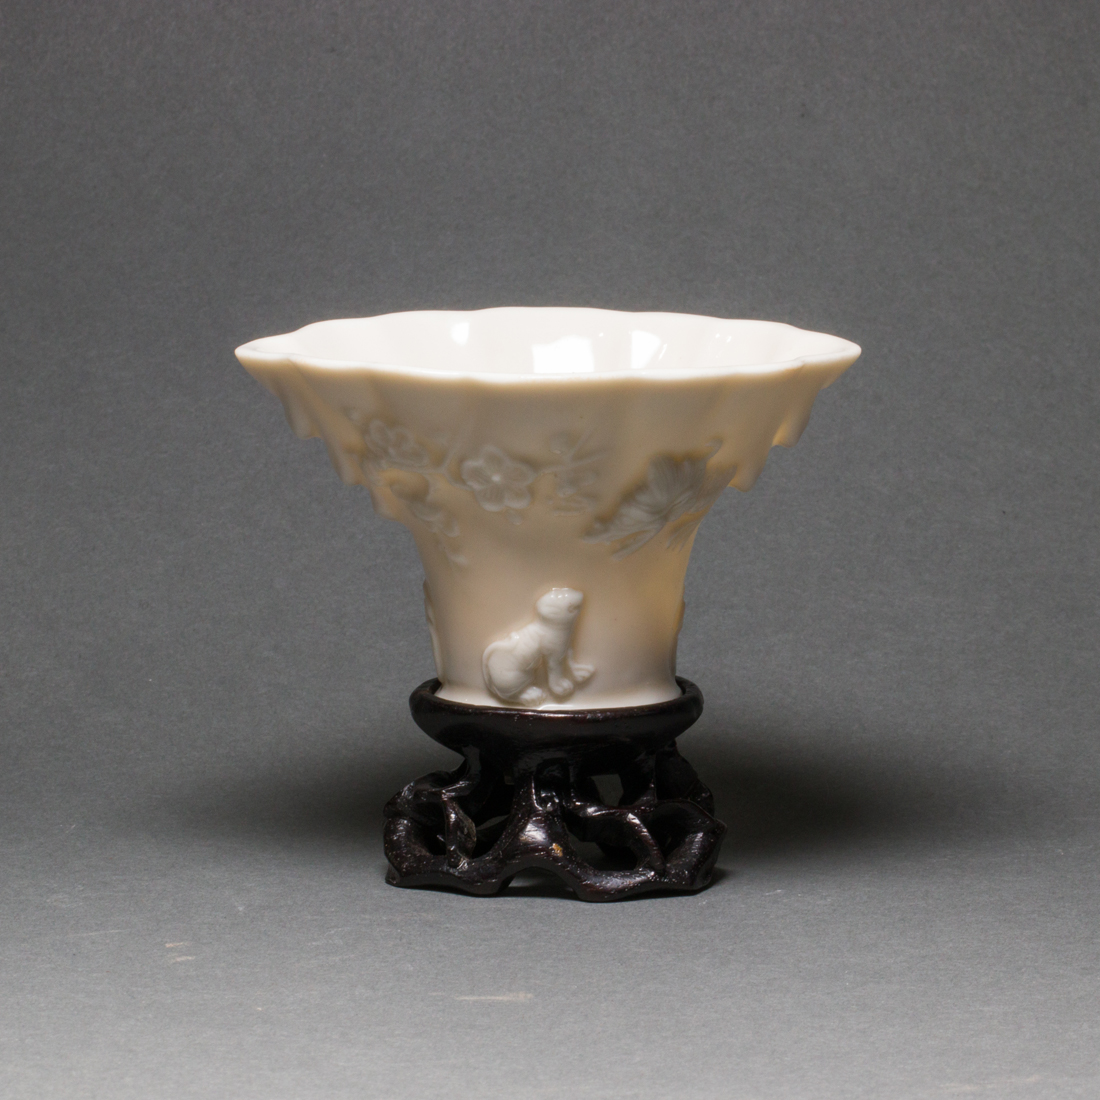 CHINESE DEHUA MOLDED LIBATION CUP 3a15a7